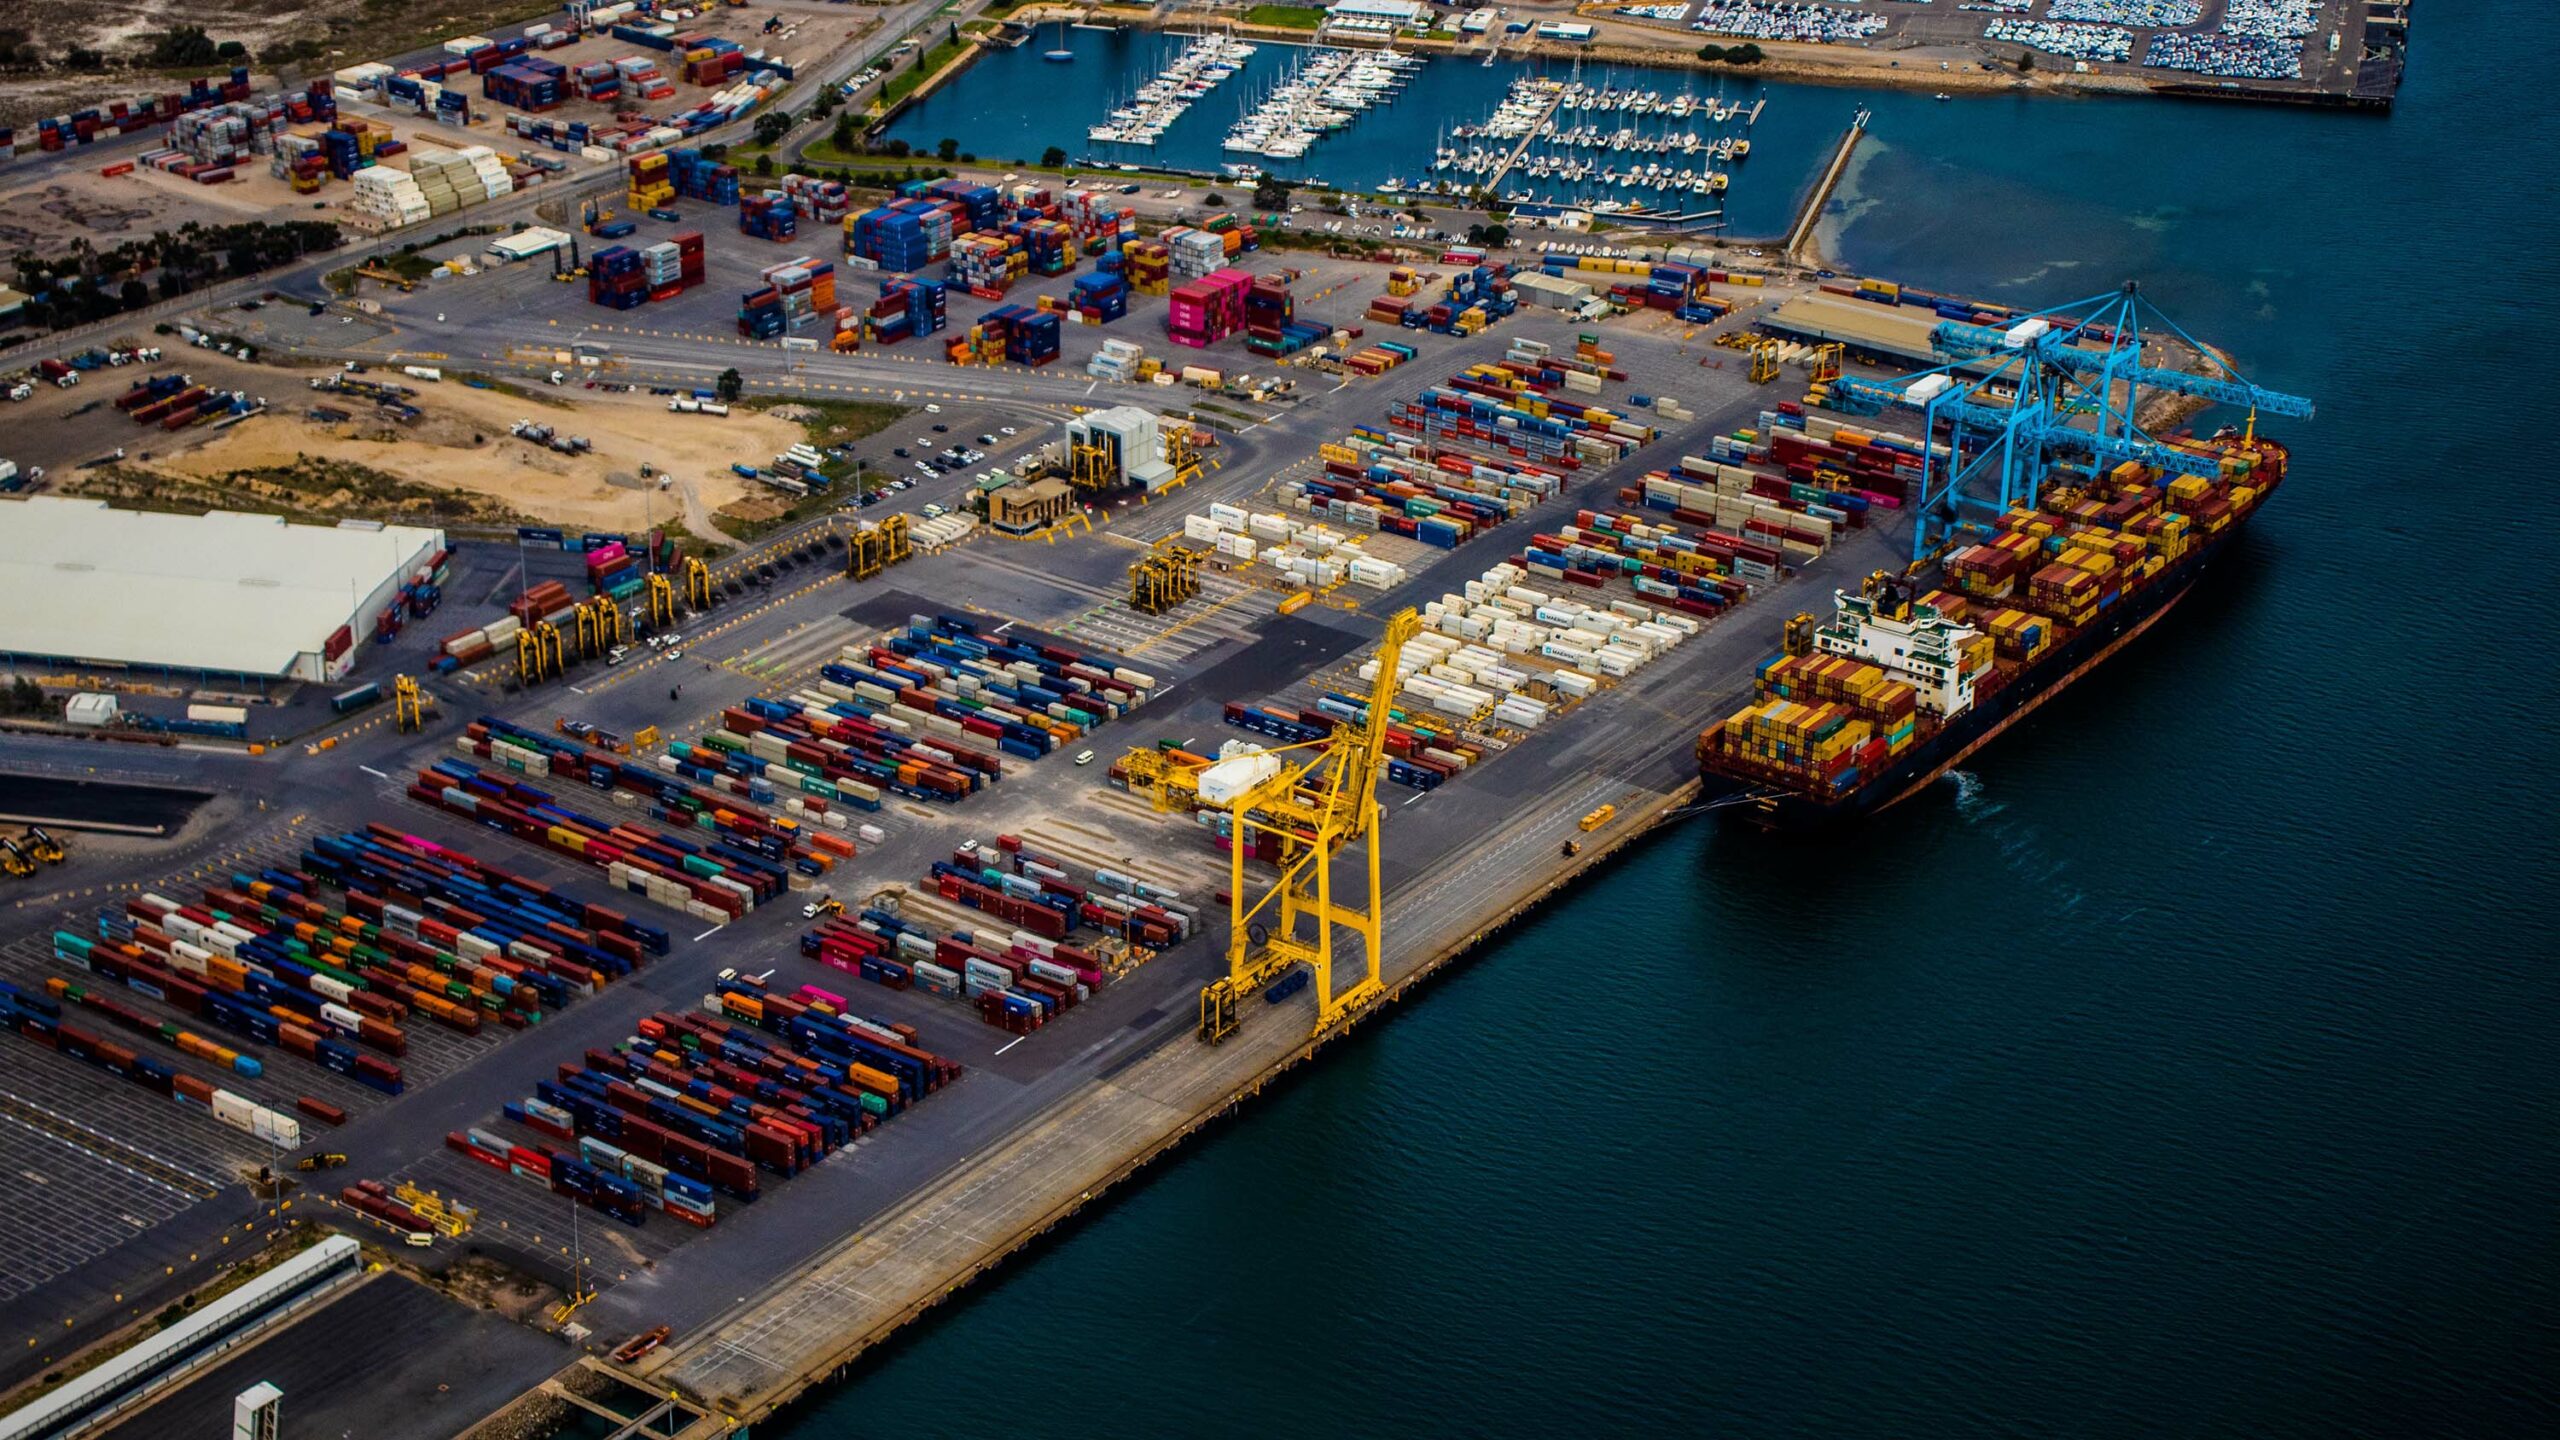 Containers and ships in port